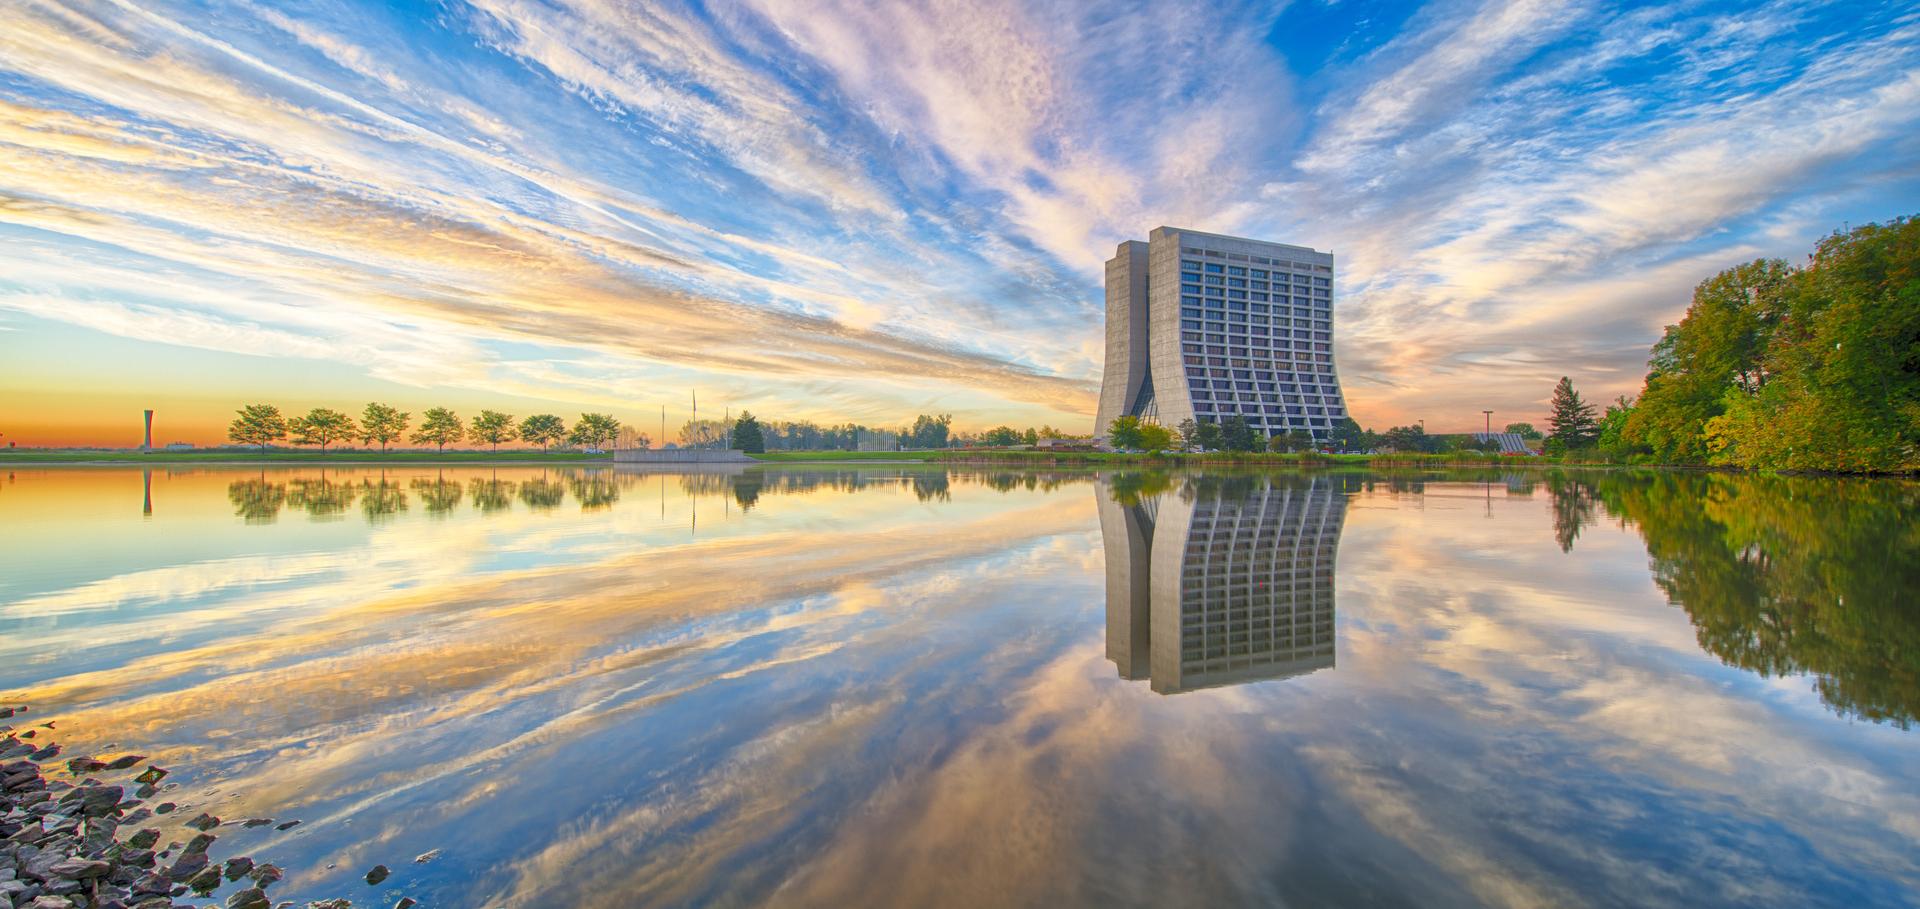 Wilson Hall at Fermilab with reflection at sunrise.